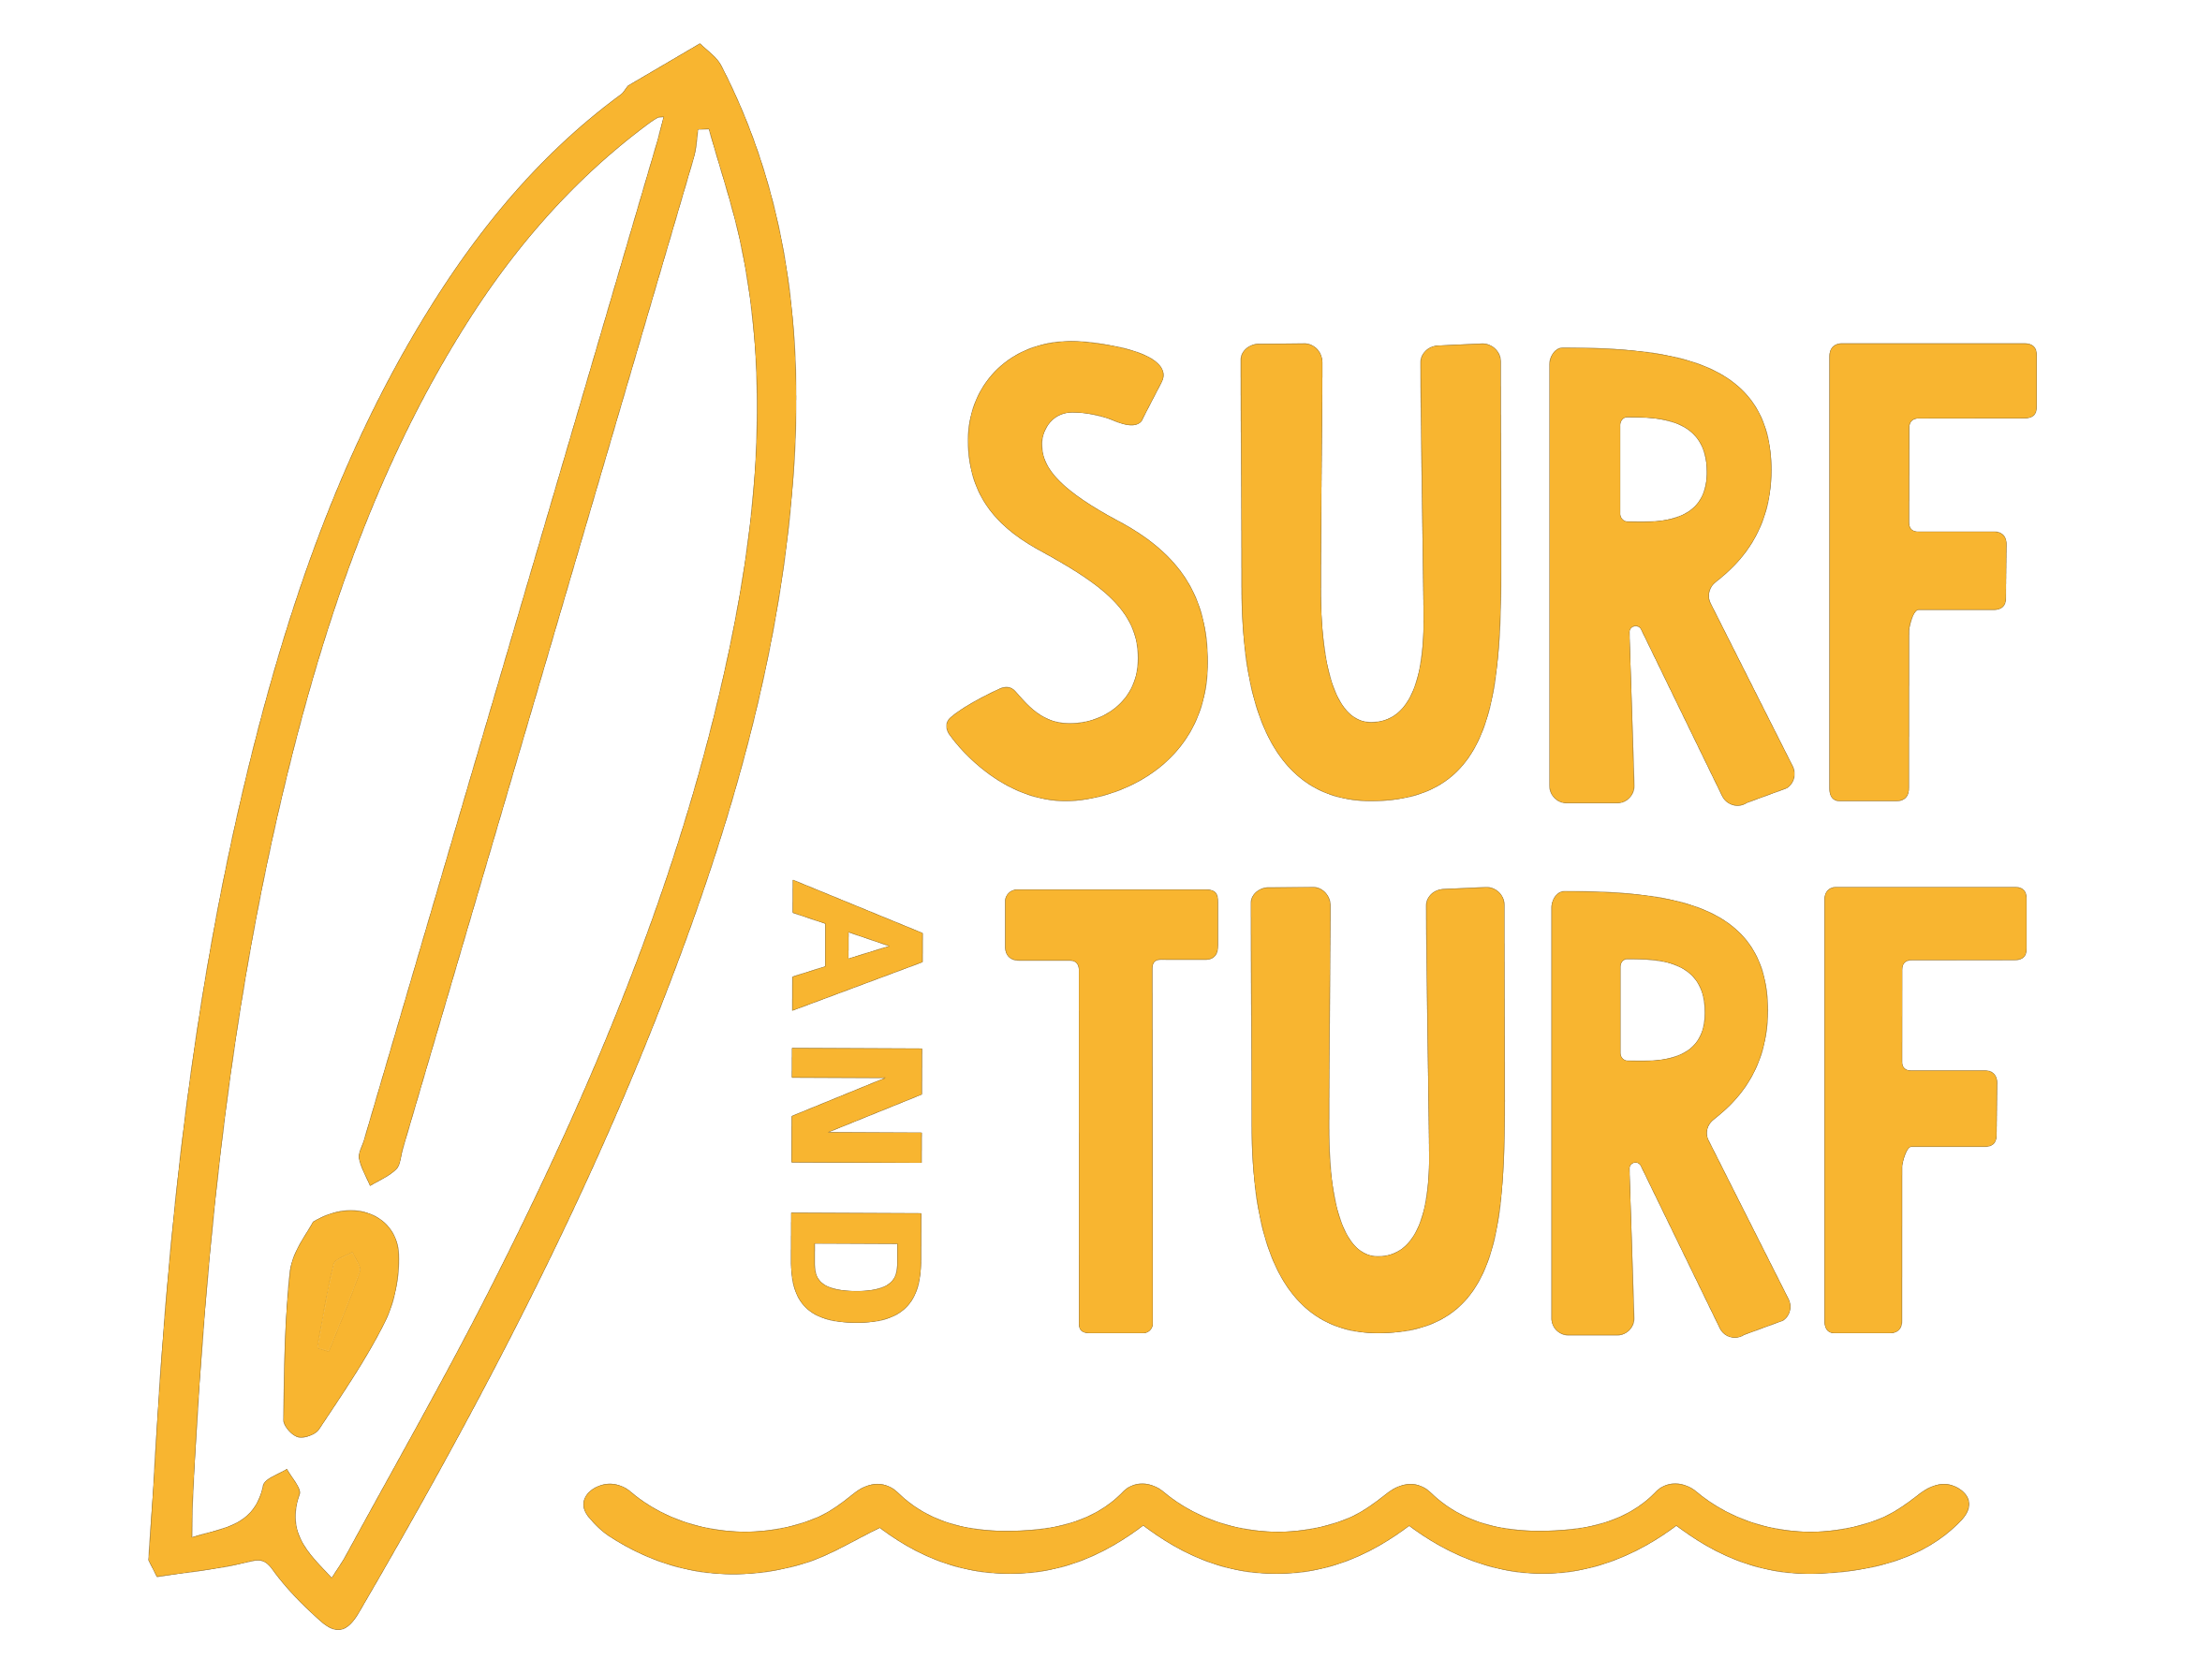 Surf ‘n’ Turf – Inme :: Summer Camps for Kids | Outdoor Nature Camps